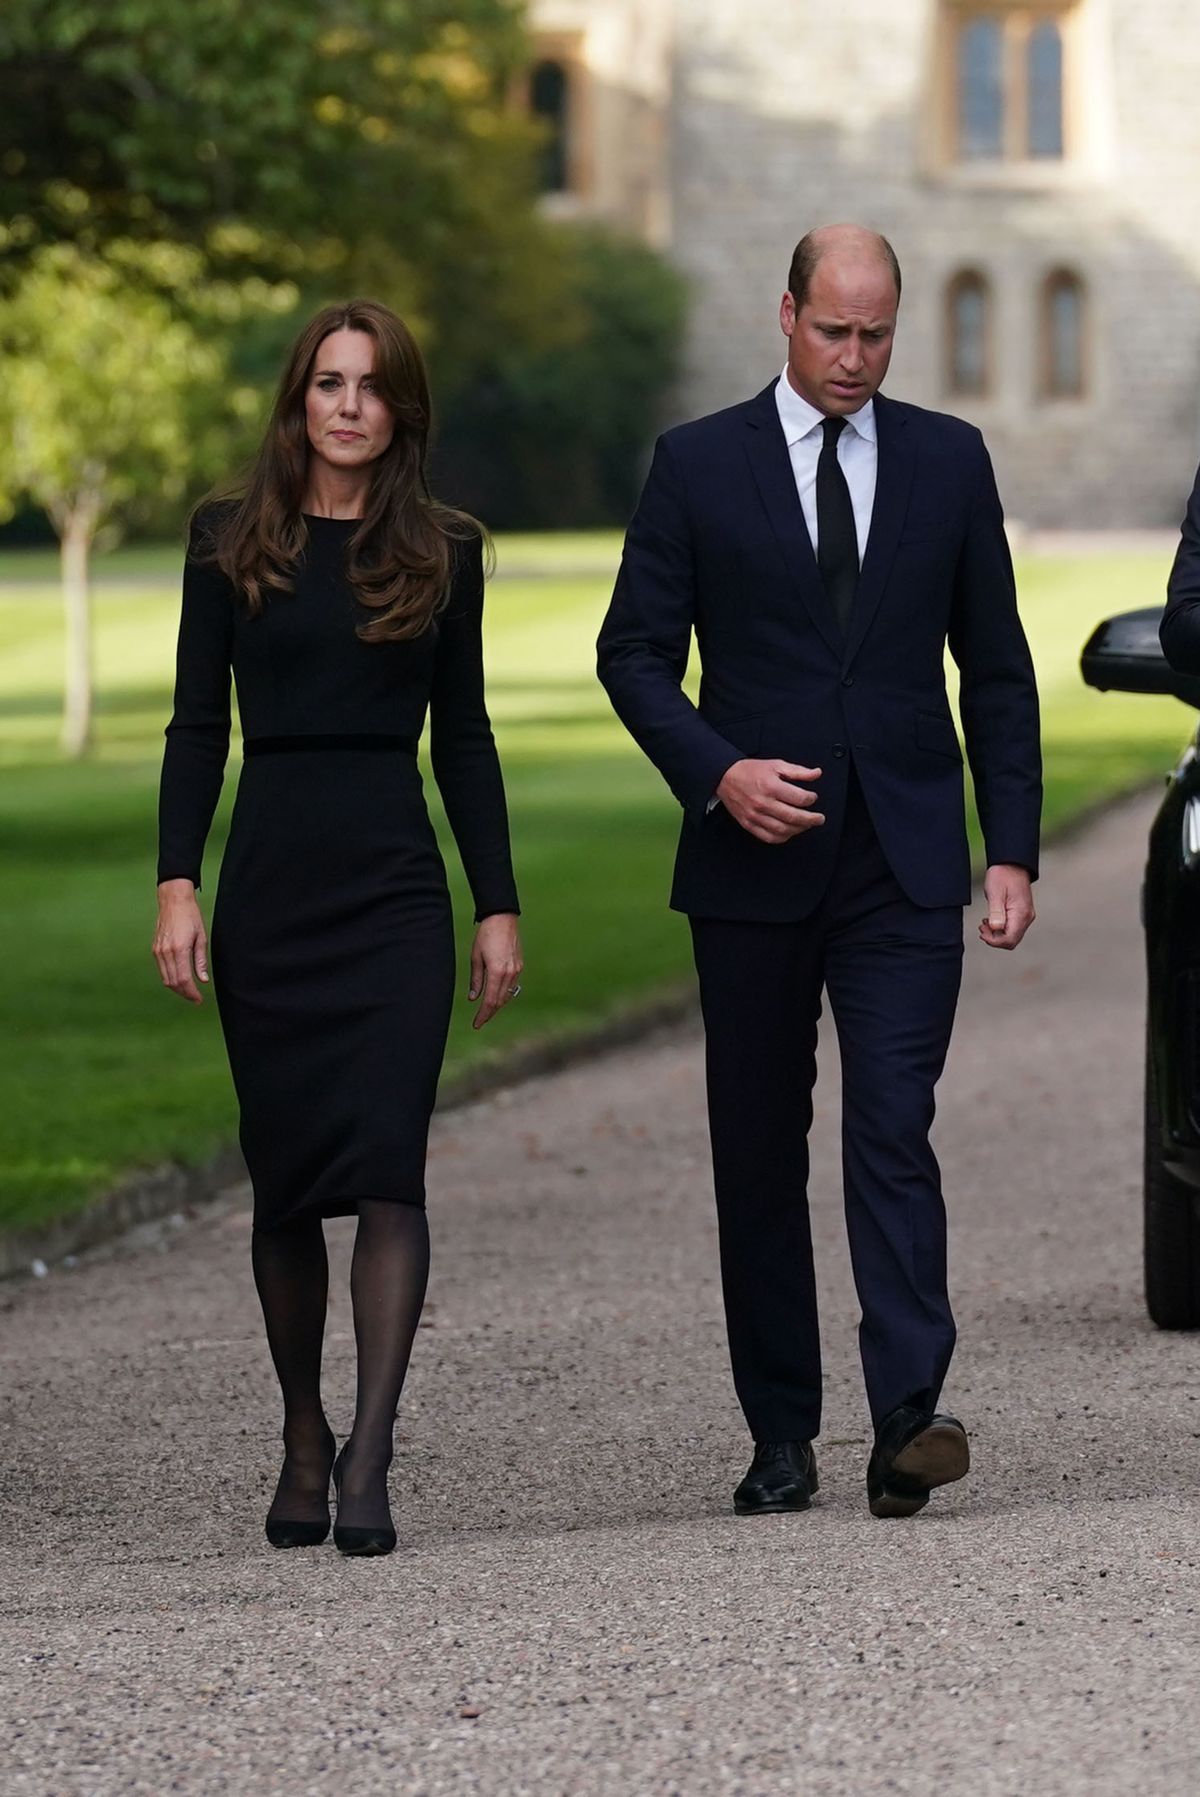 William, Kate, Harry and Meghan at Windsor Castle